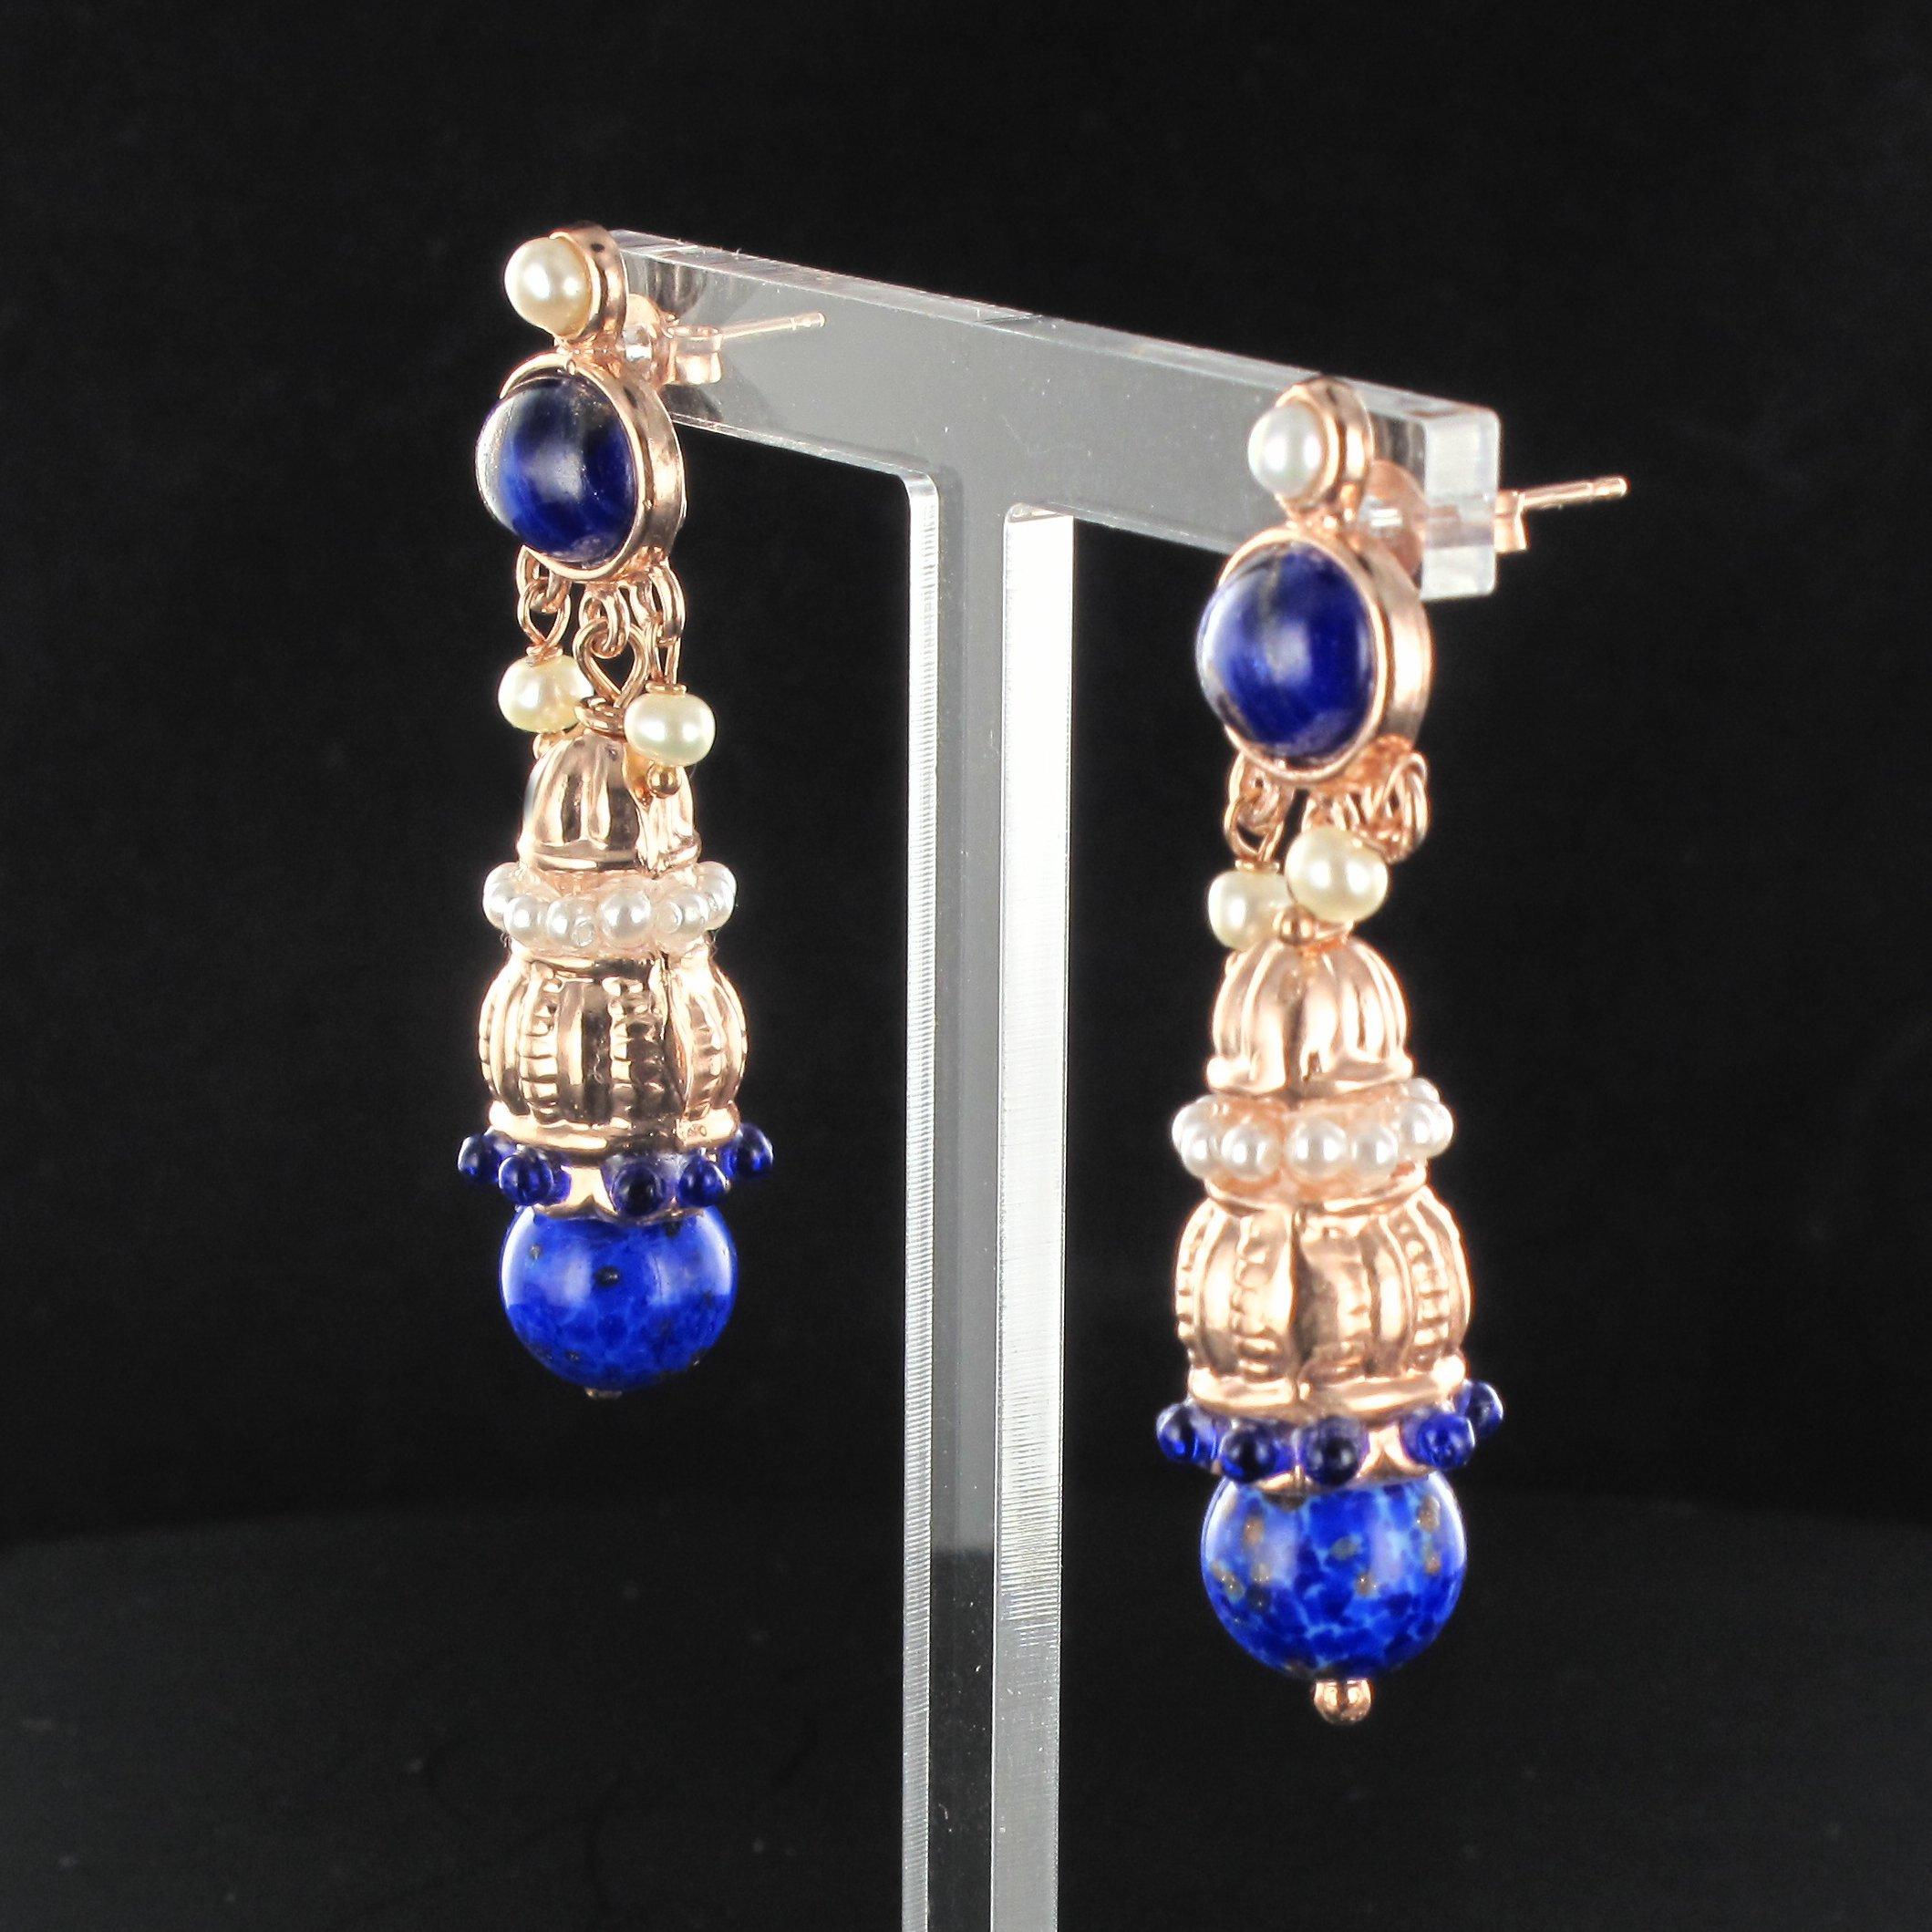 Baroque Antique Style Blue Stone Pearl Pendant Earrings